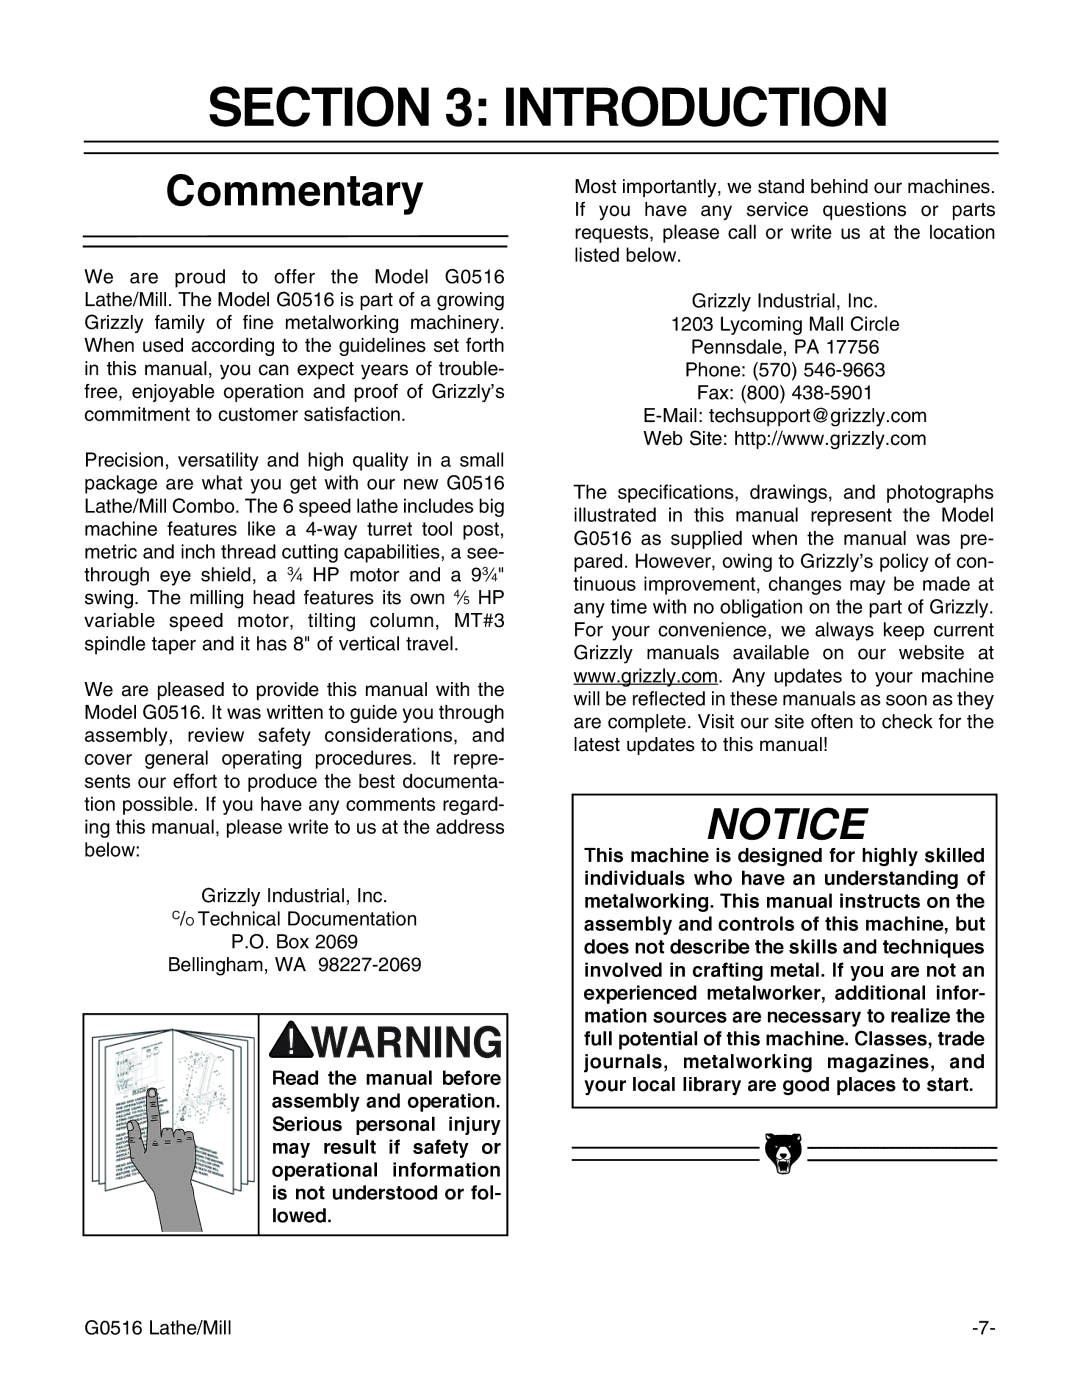 Grizzly G0516 instruction manual Introduction, Commentary 